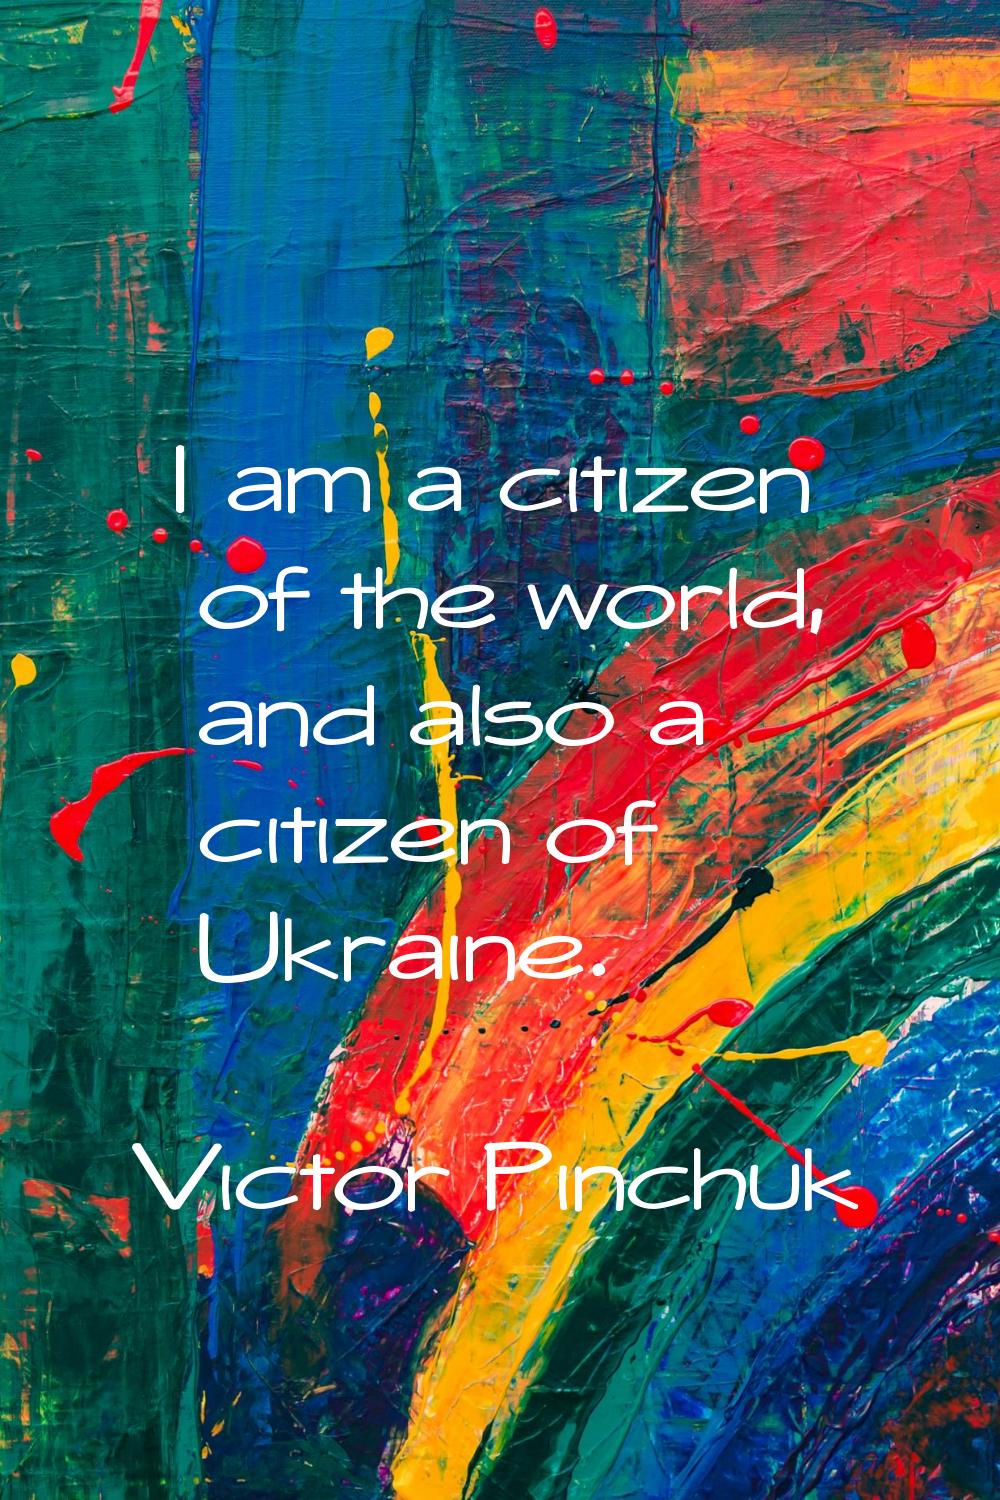 I am a citizen of the world, and also a citizen of Ukraine.